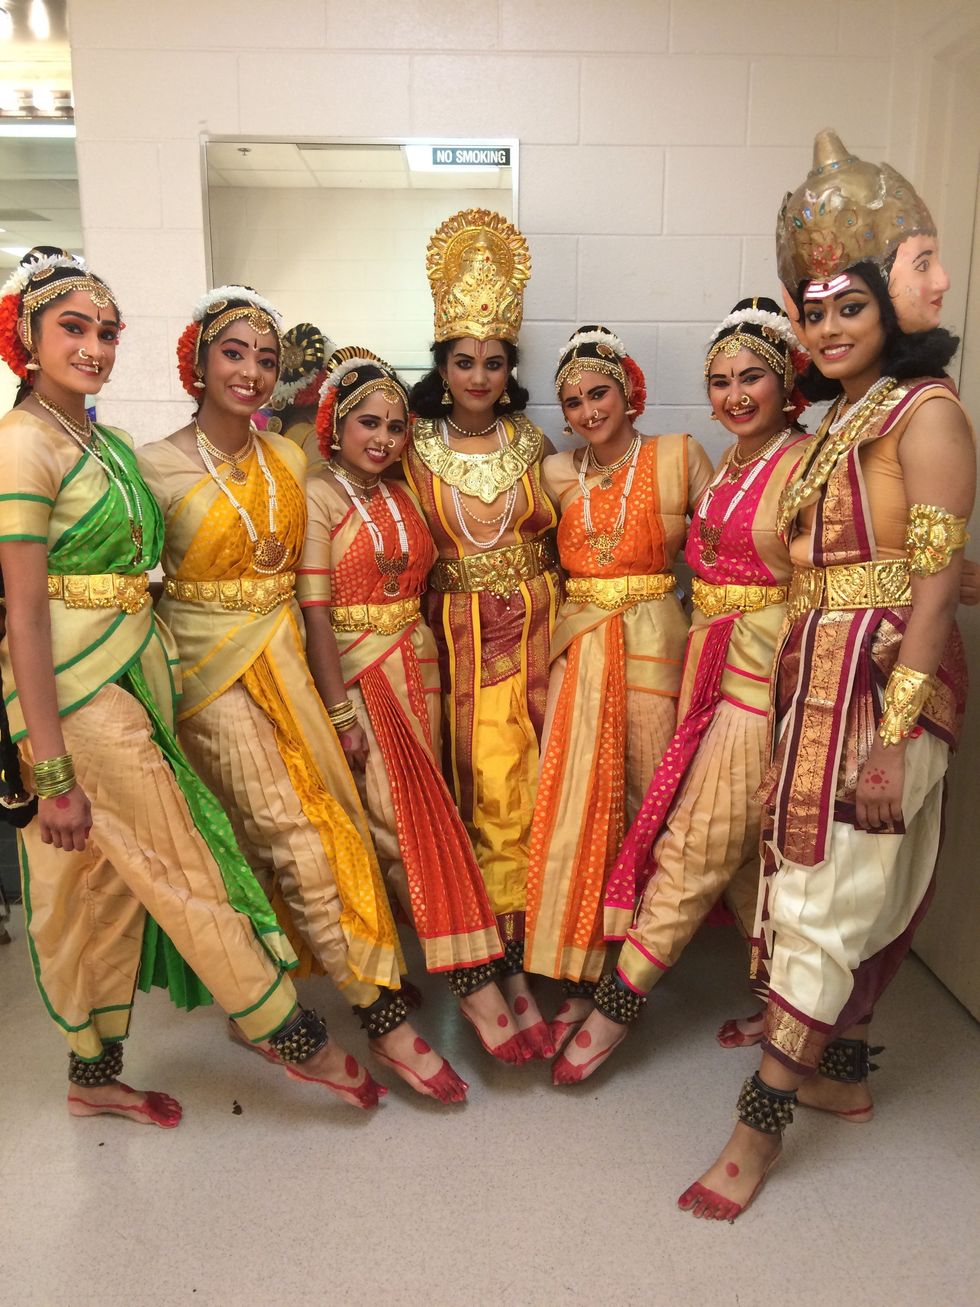 My Experience at Kuchipudi Dance Convention